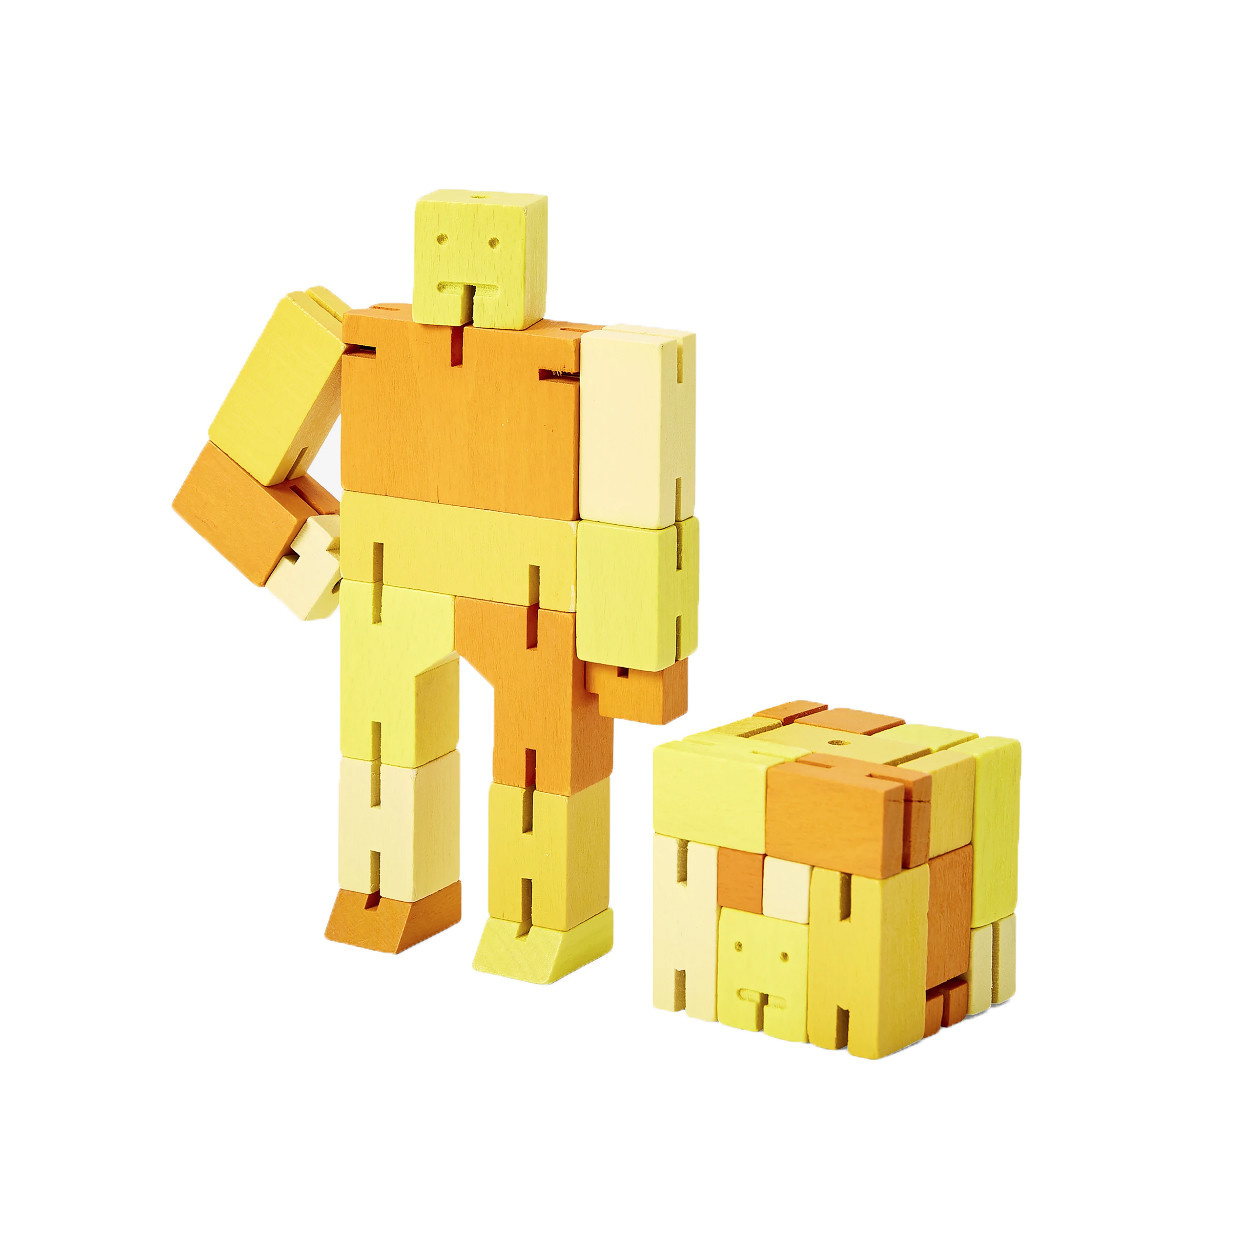 Cubebot Capsule Small - Yellow